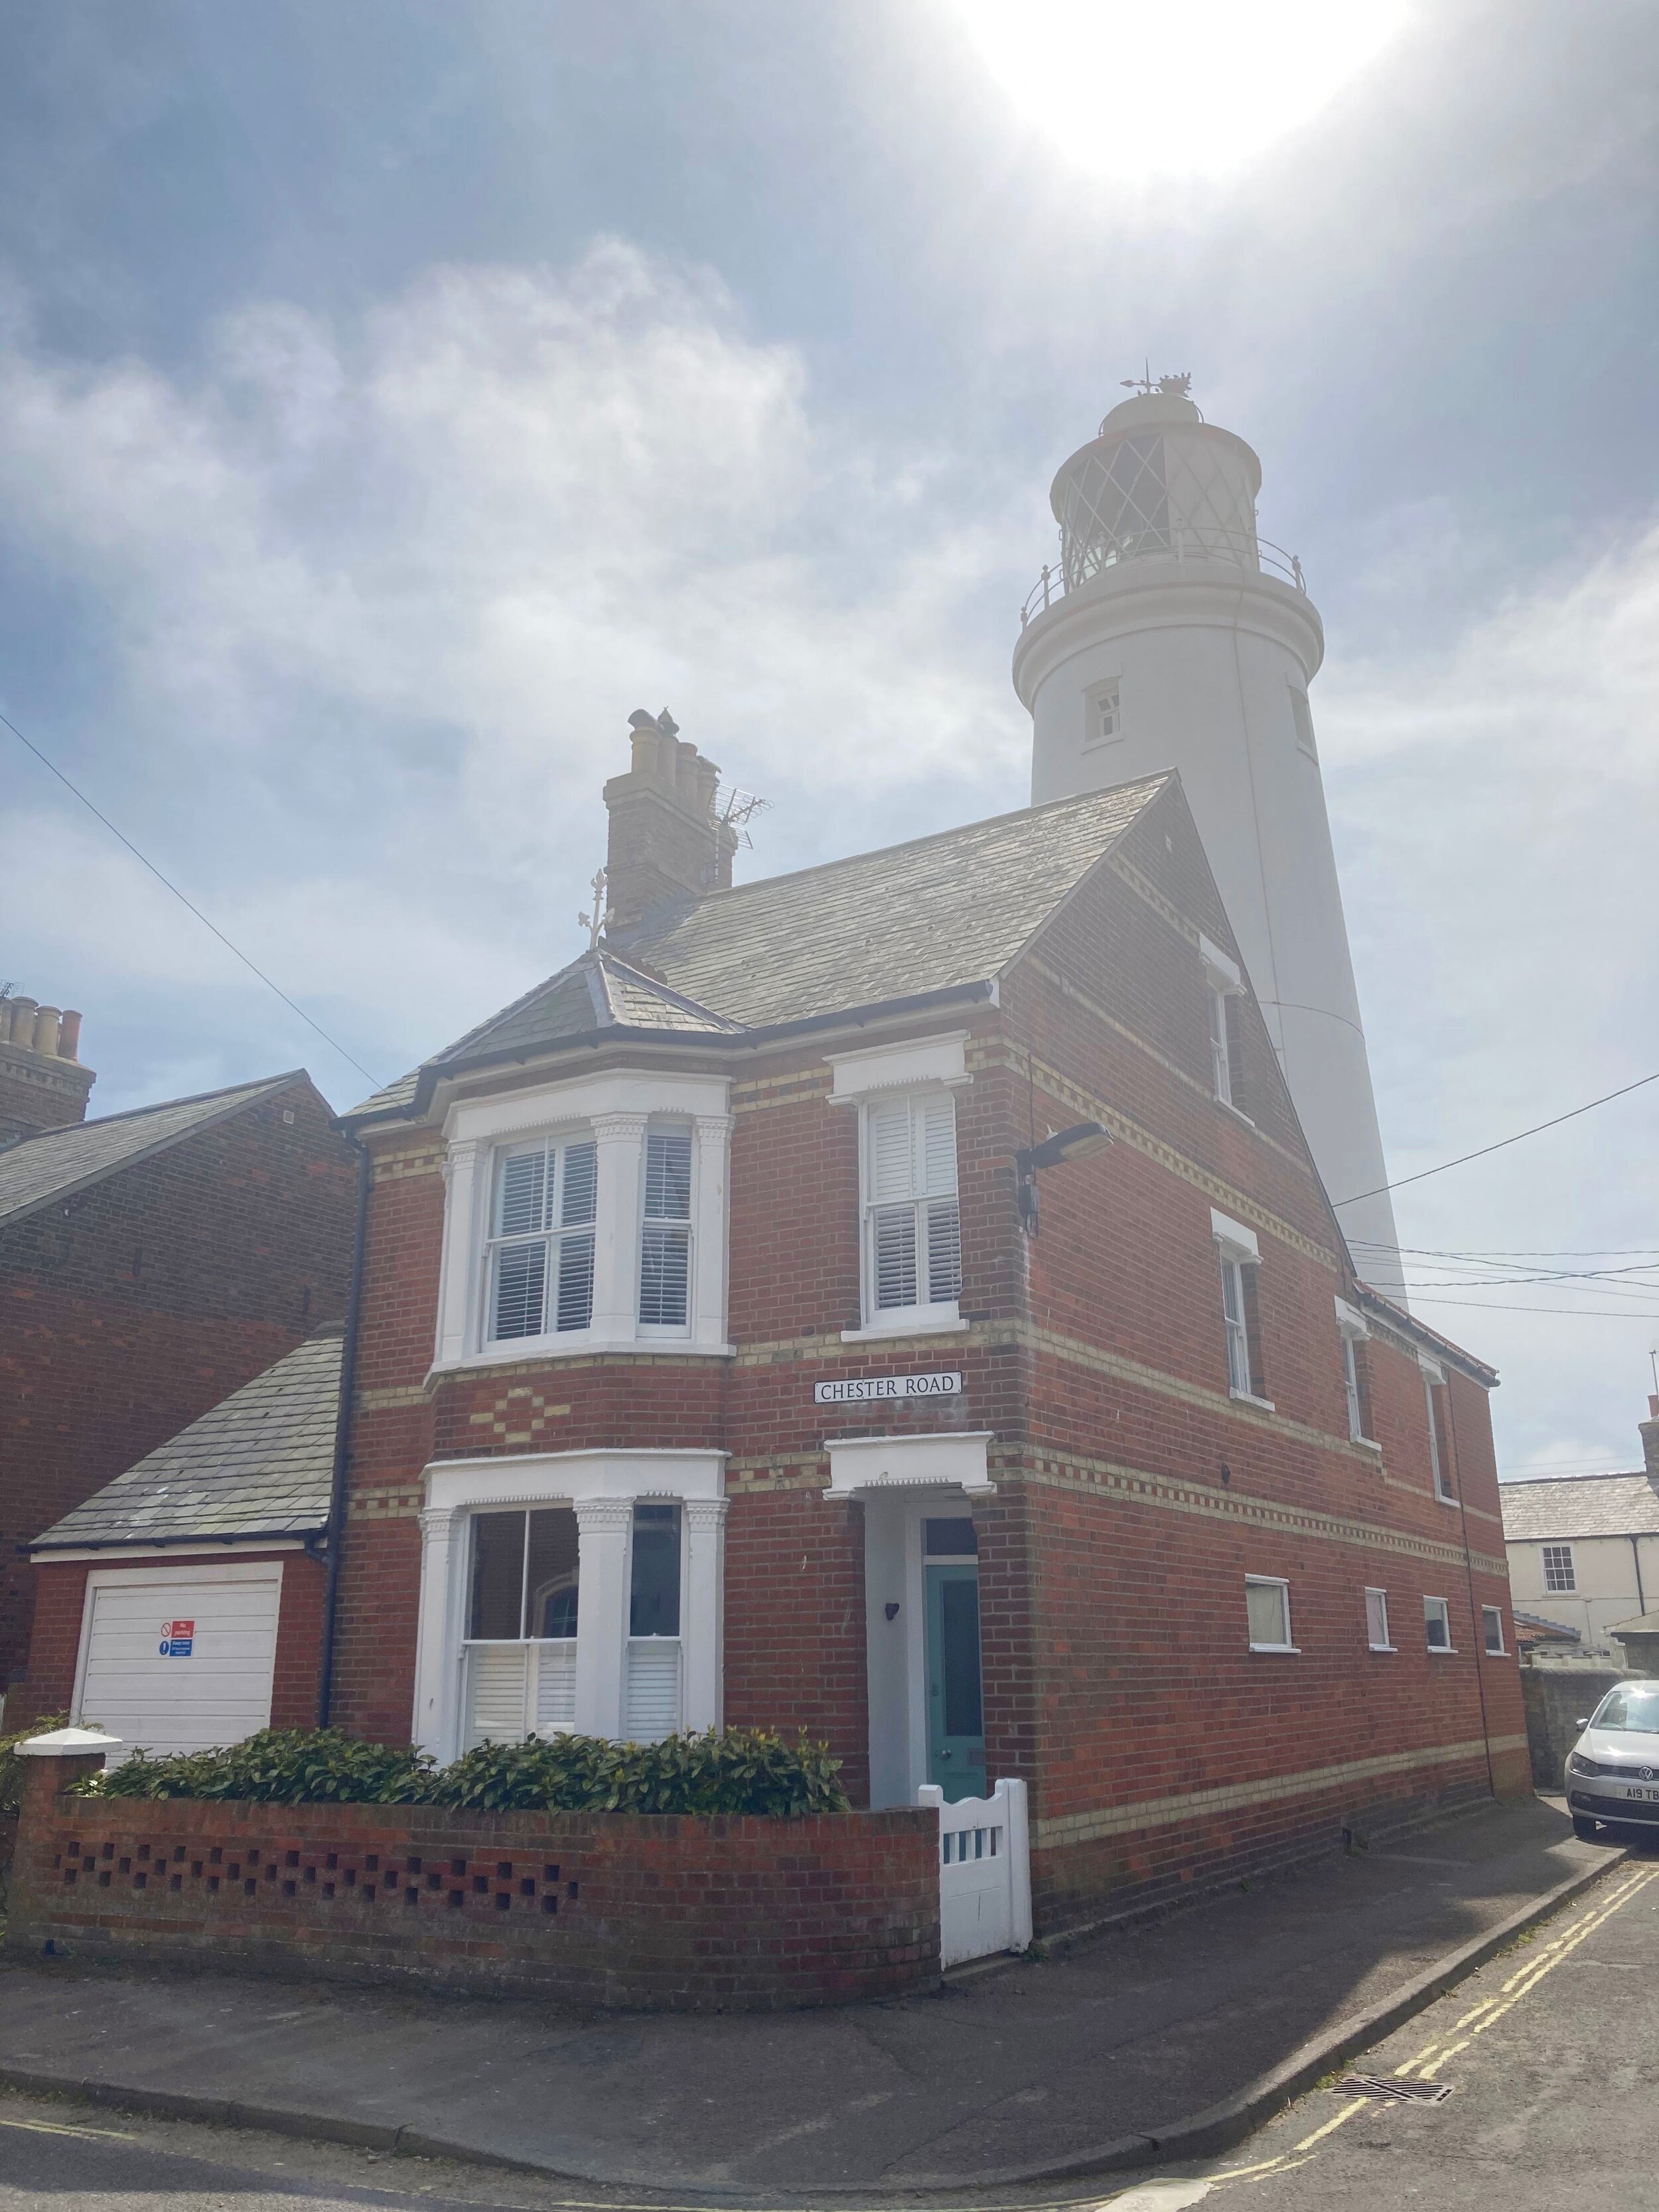 The lighthouse in Southwold